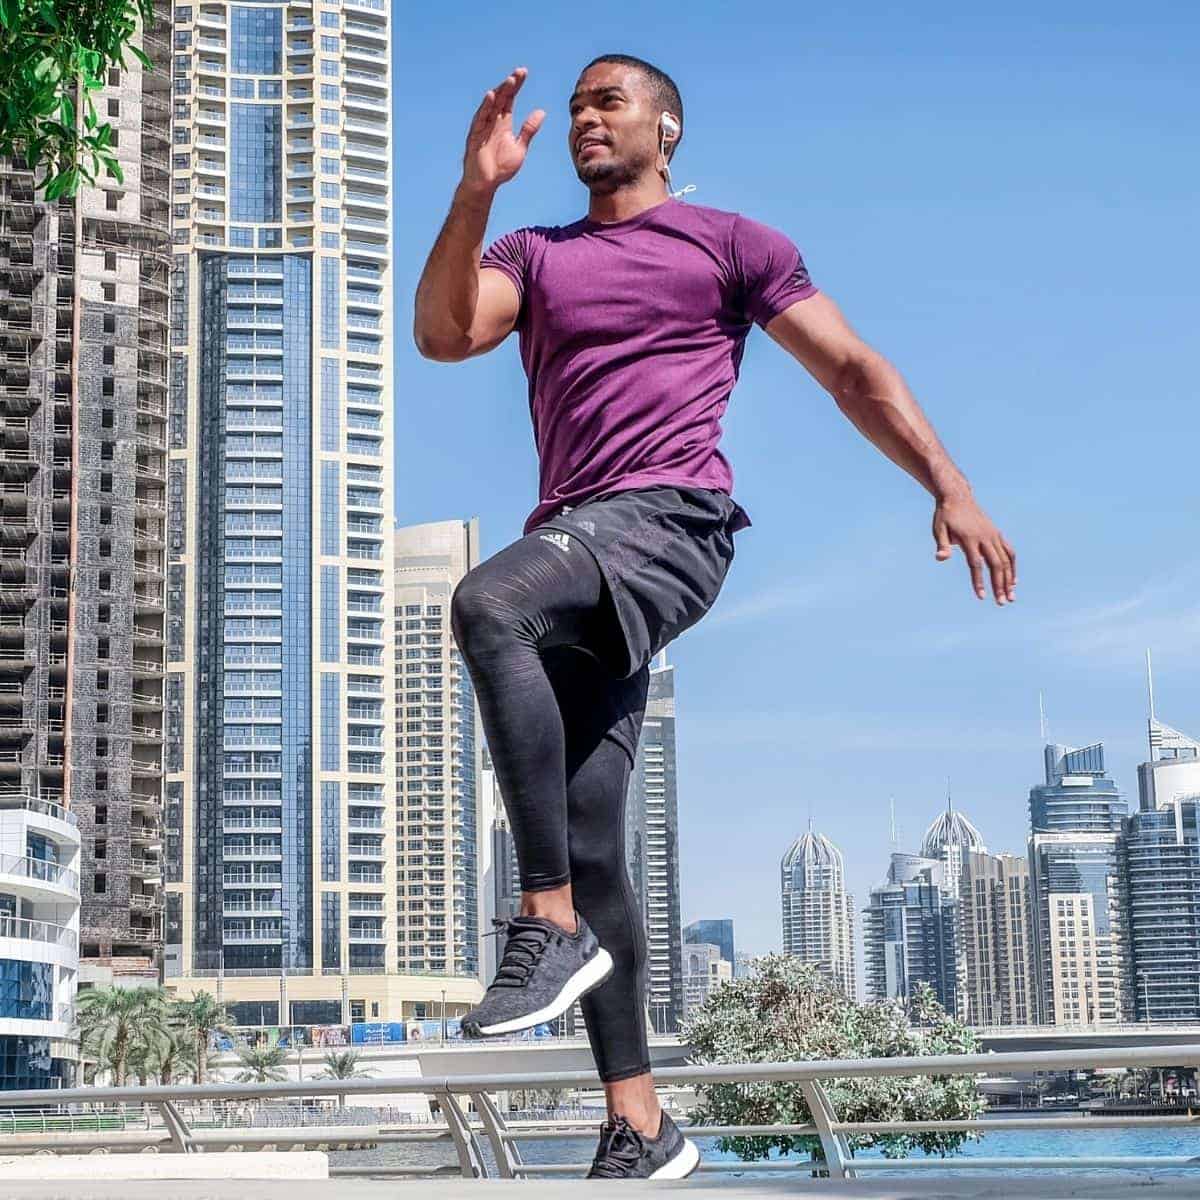 Person exercising outdoors with high-rise buildings in the background.